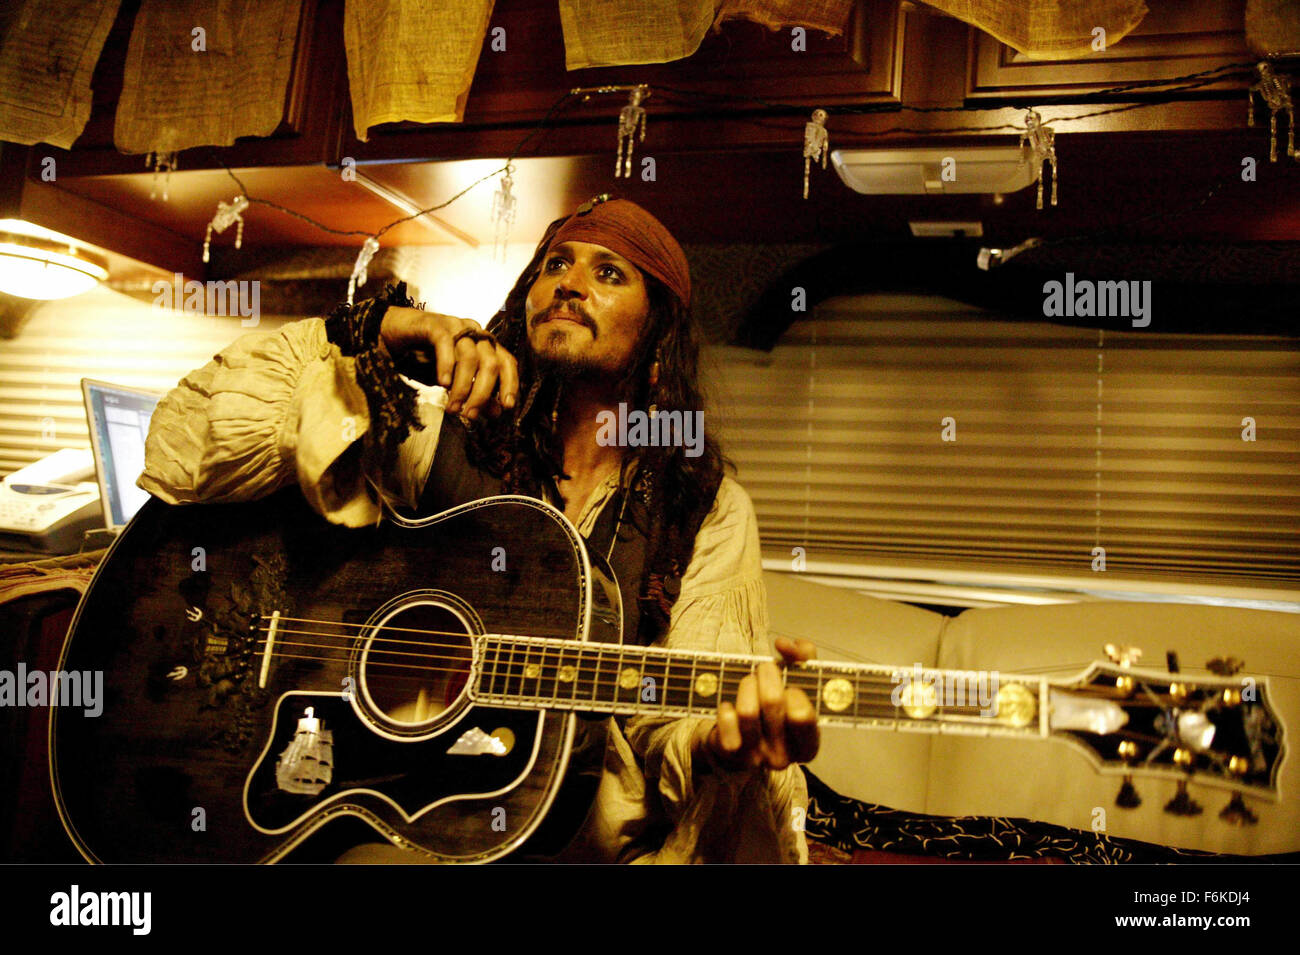 RELEASE DATE: July 7, 2006. MOVIE TITLE: Pirates of the Caribbean: Dead Man's Chest. STUDIO: Walt Disney Pictures. PLOT: Jack Sparrow races to recover the heart of Davy Jones to avoid enslaving his soul to Jones' service, as other friends and foes seek the heart for their own agenda as well. PICTURED: JOHNNY DEPP as Captain Jack Sparrow. Stock Photo